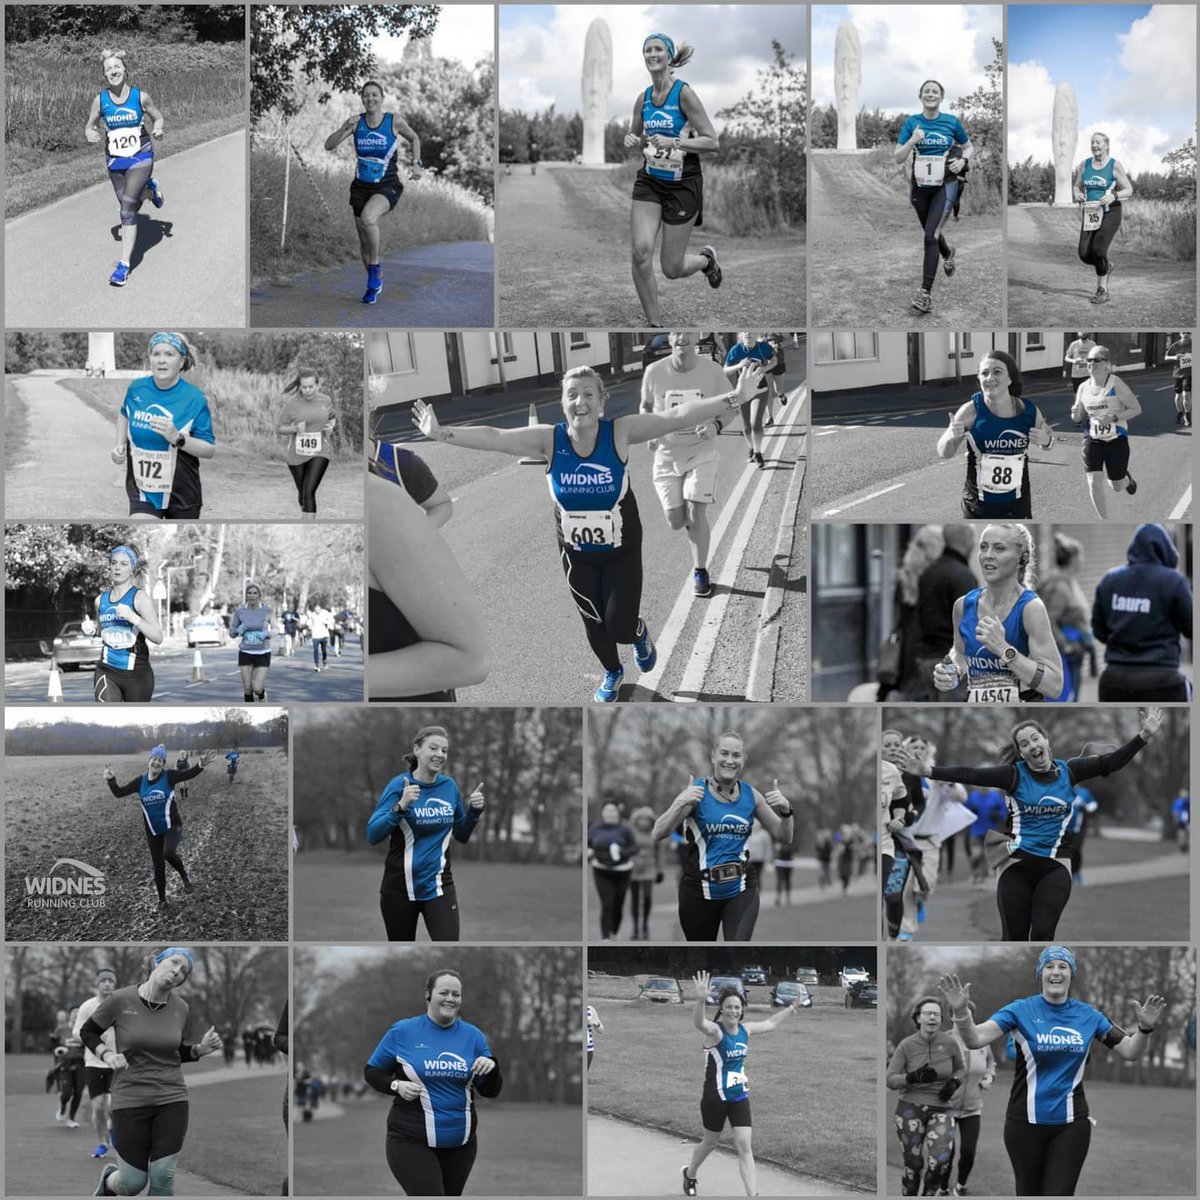 Our fantastic ladies are always pushing boundaries, leading by example, challenging the status quo 💪 What more inspiration do you need on a Monday morning 👊 #widnesrunningclub #widnes #halton #MondayMotivation #IWD21 #ChooseToChallenge #InternationalWomensDay